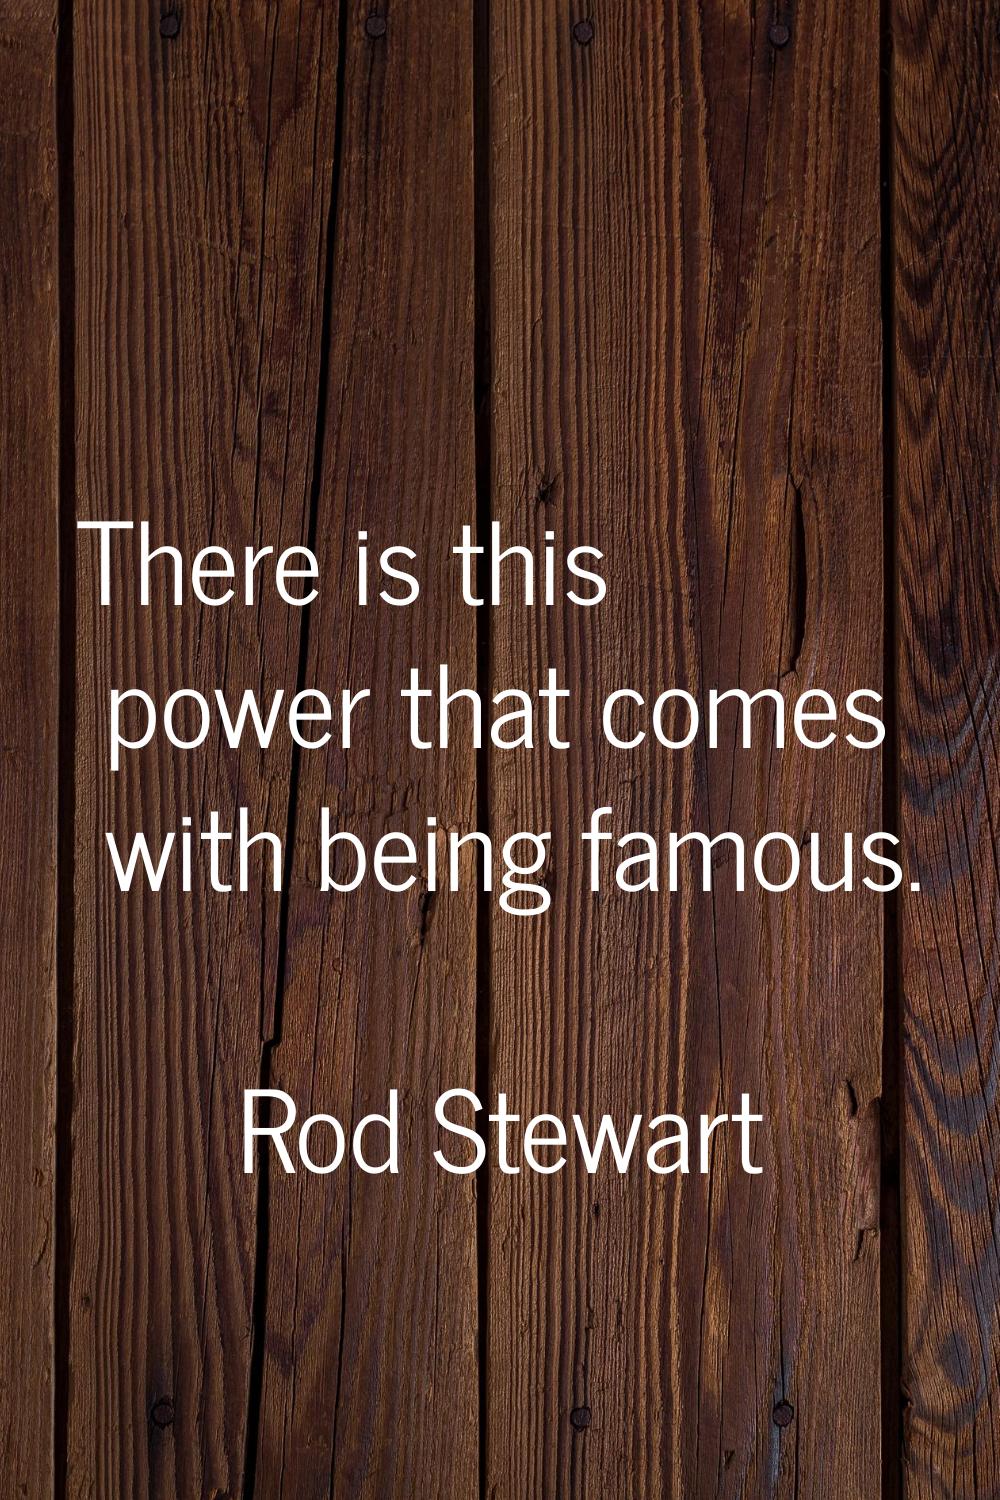 There is this power that comes with being famous.